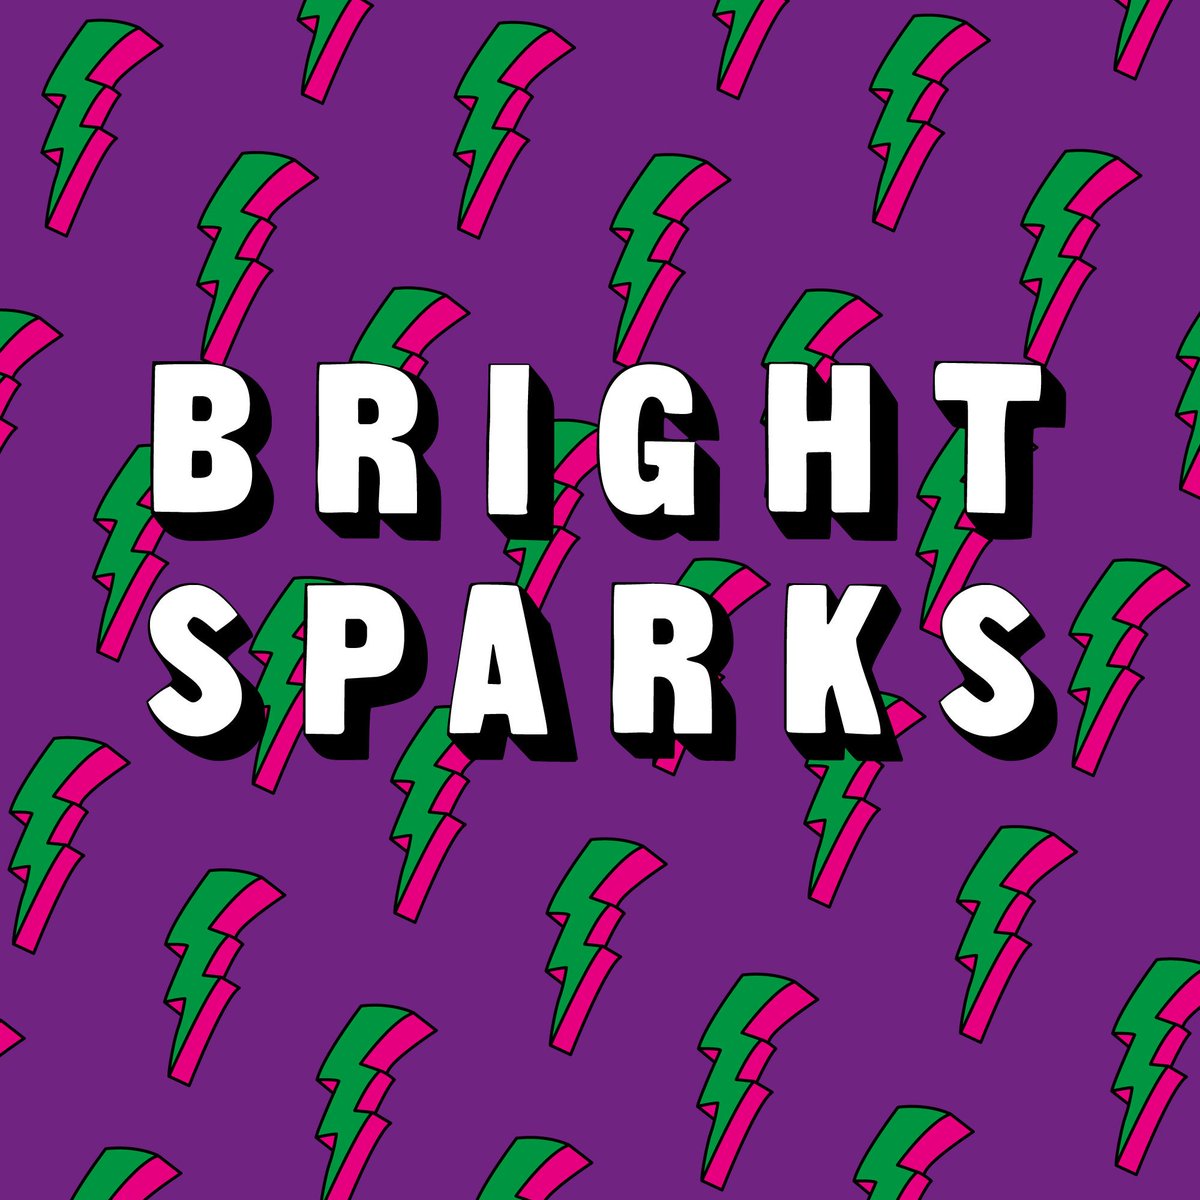 The new volume of Bright Sparks is live, with music from @estherrose, @BloodCultures, @steadycraig, @emilyfairlight, @barrietheband, @shanemaketweet, @JW_RIDLEY, @ruthiesongs_, @goldlightmusic, @blushtunes & more. varioussmallflames.co.uk/2019/04/03/bri…